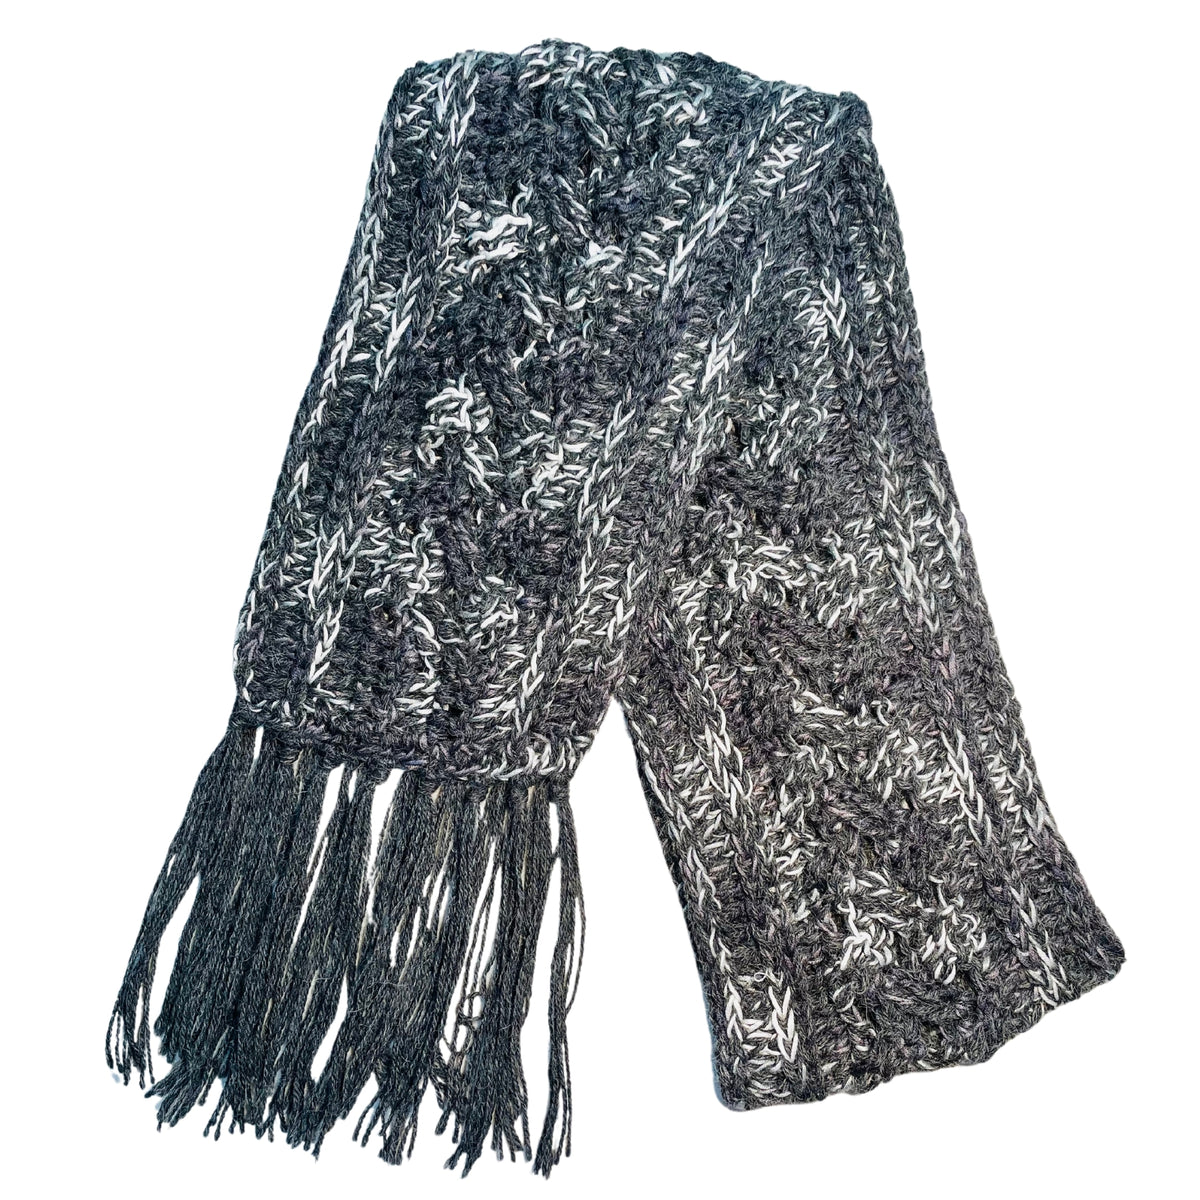 Cozy soft warm alpaca and bamboo scarf for winter fashion. Handmade knitted crochet scarf made from yarn in the colors black, charcoal, dark gray, light gray, and white.